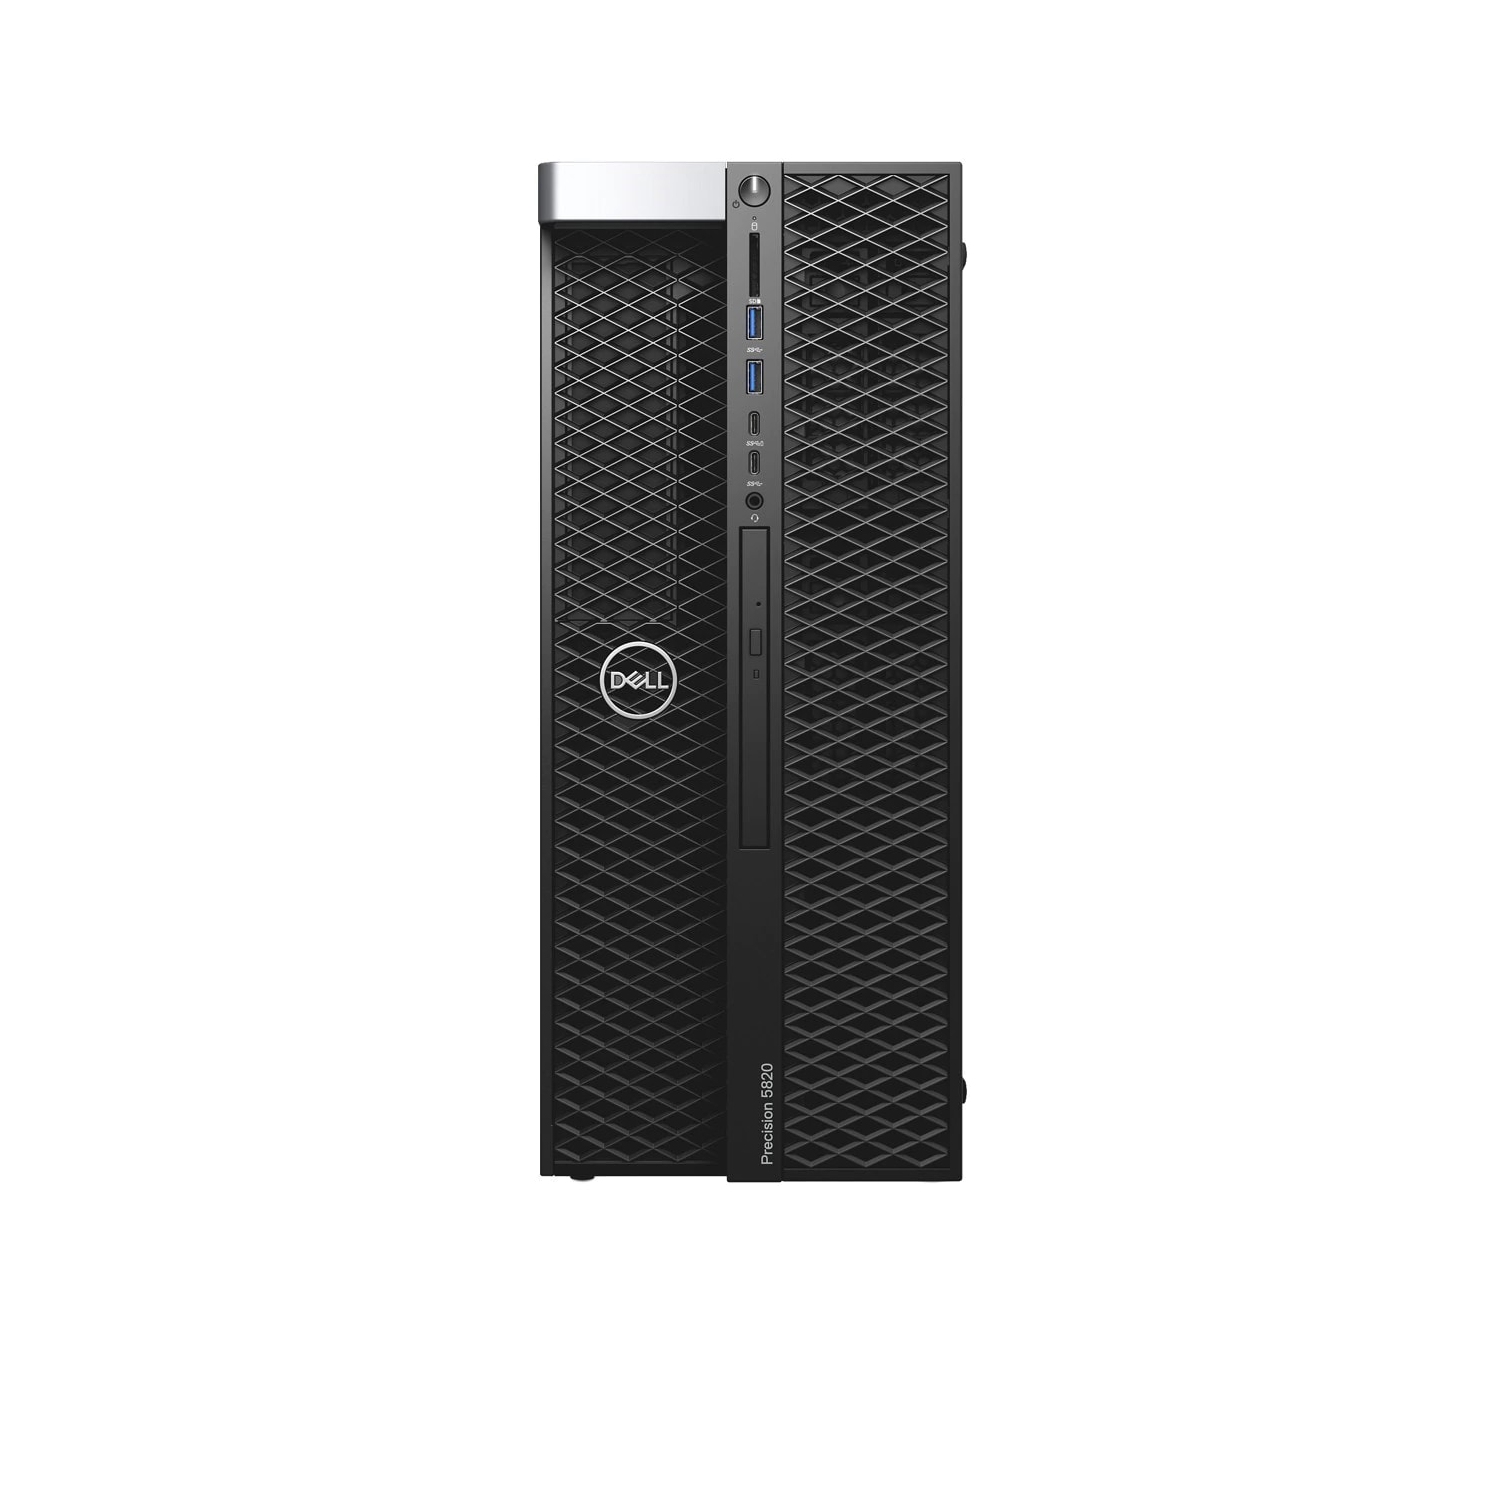 Refurbished (Excellent) - Dell Precision T5820 Workstation Desktop (2018), Core i9, 92TB SSD + 12TB HDD, 32GB RAM, RTX 5000, 10 Cores @ 4.5 GHz, 10th Gen CPU Certified